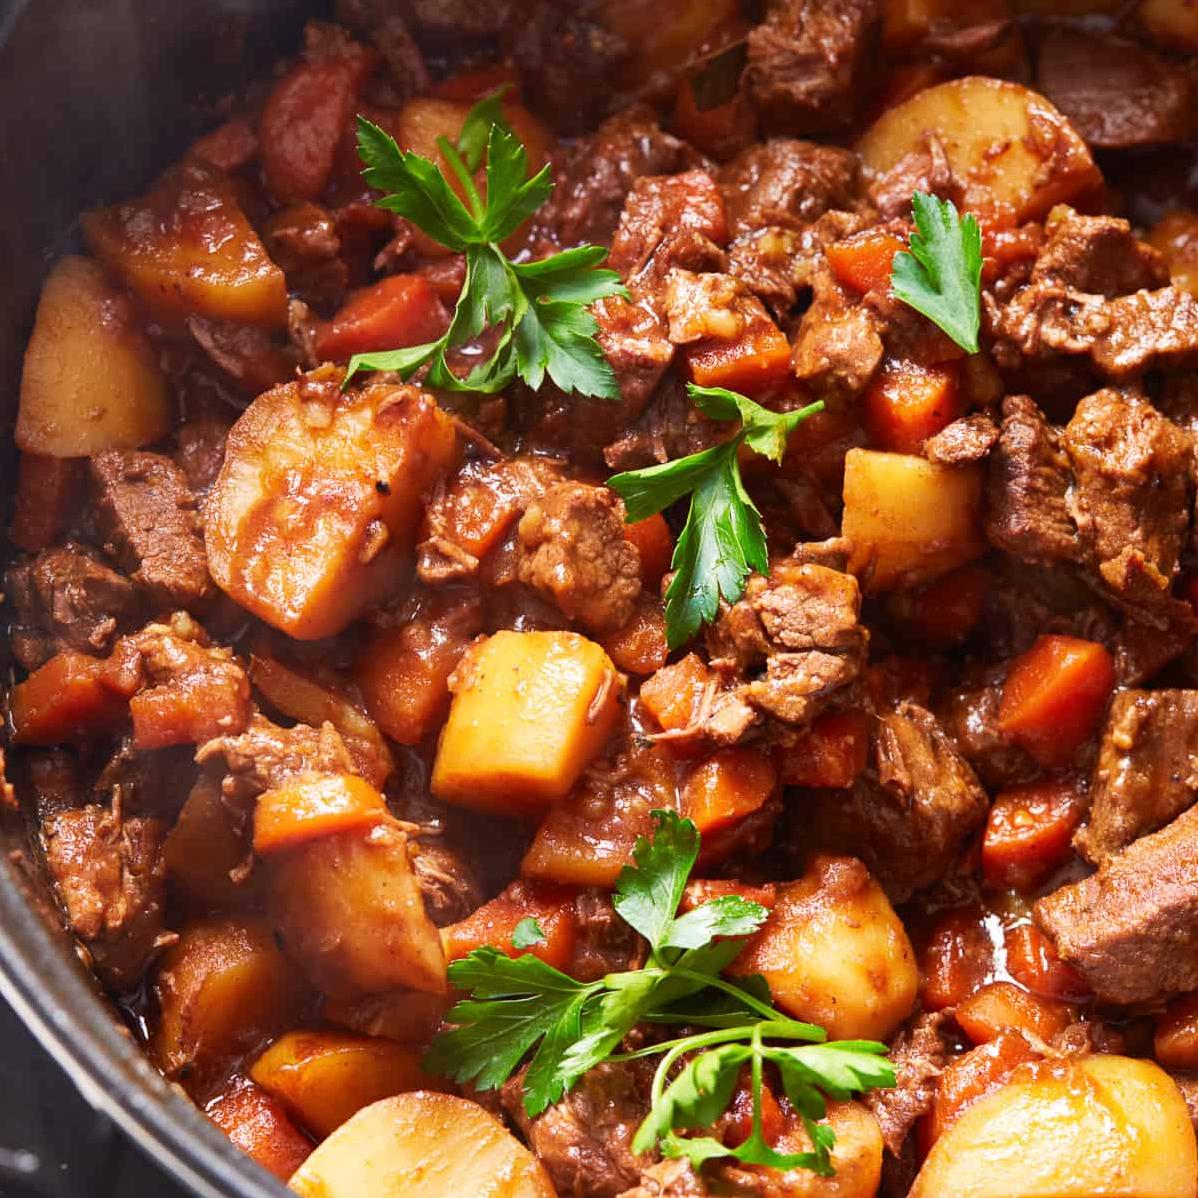  The heart of the dish is the tender beef, slow-cooked in a red wine brew from scratch.